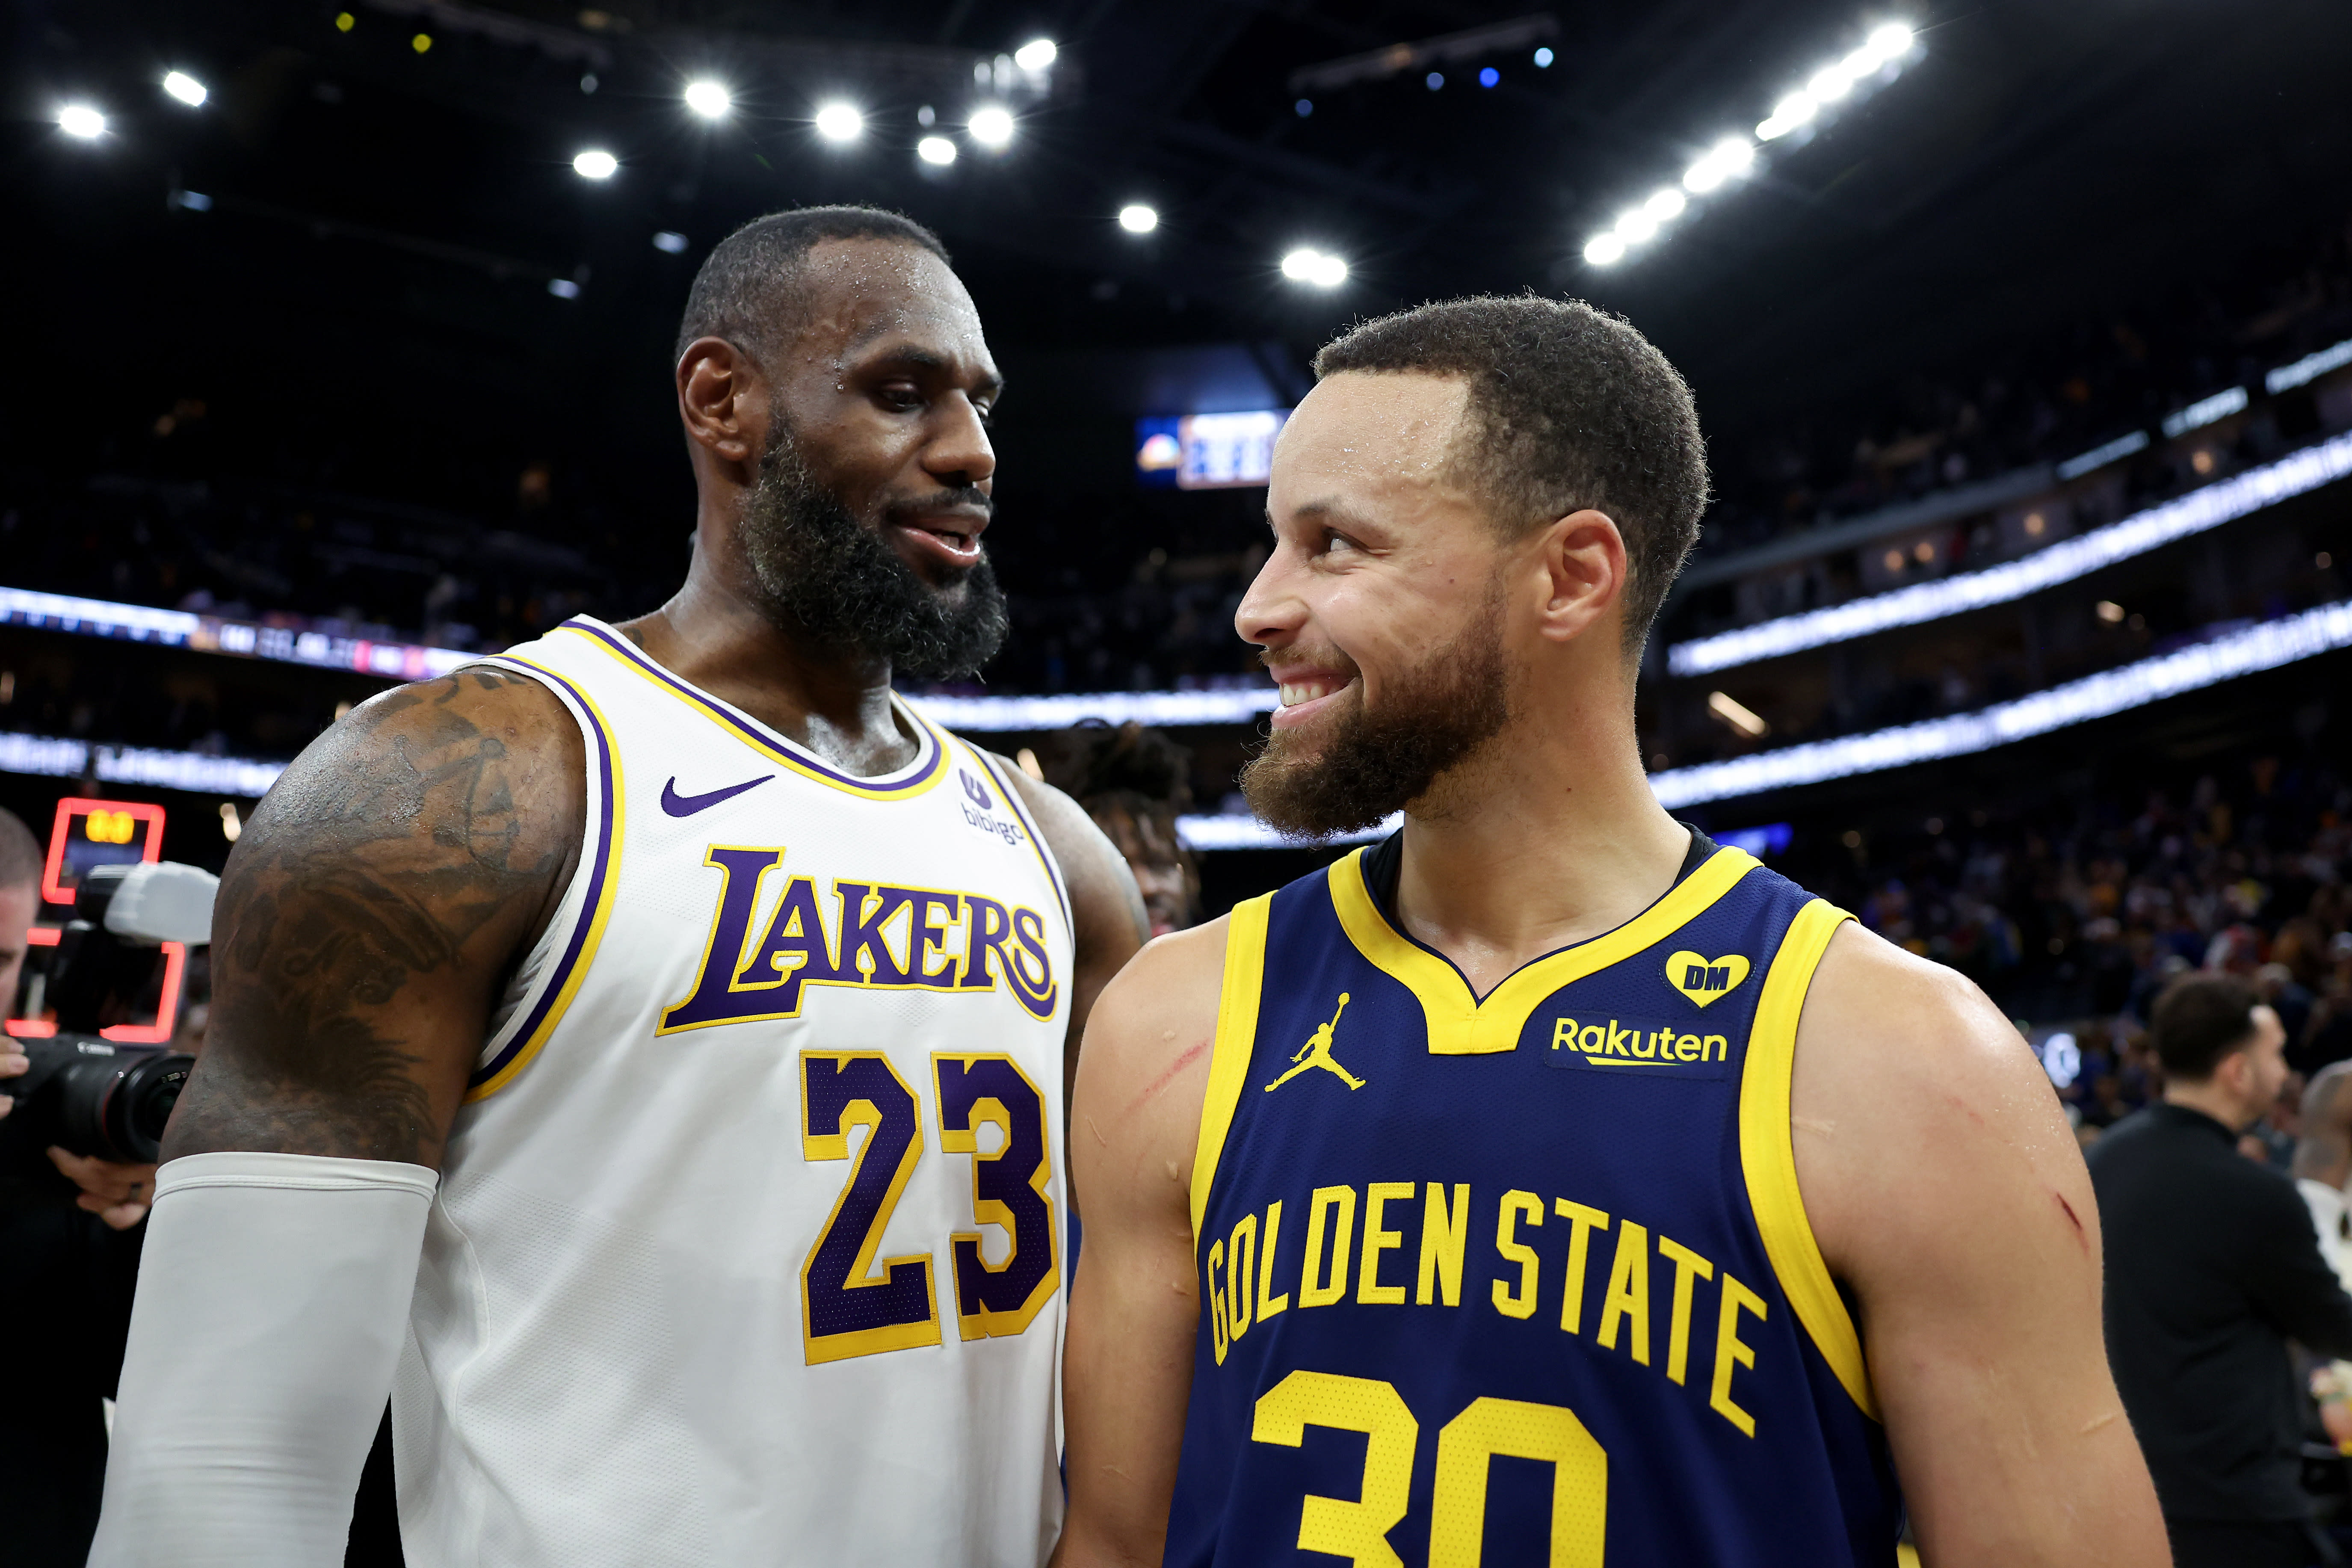 LeBron James and Steph Curry teammates? Golden State tried